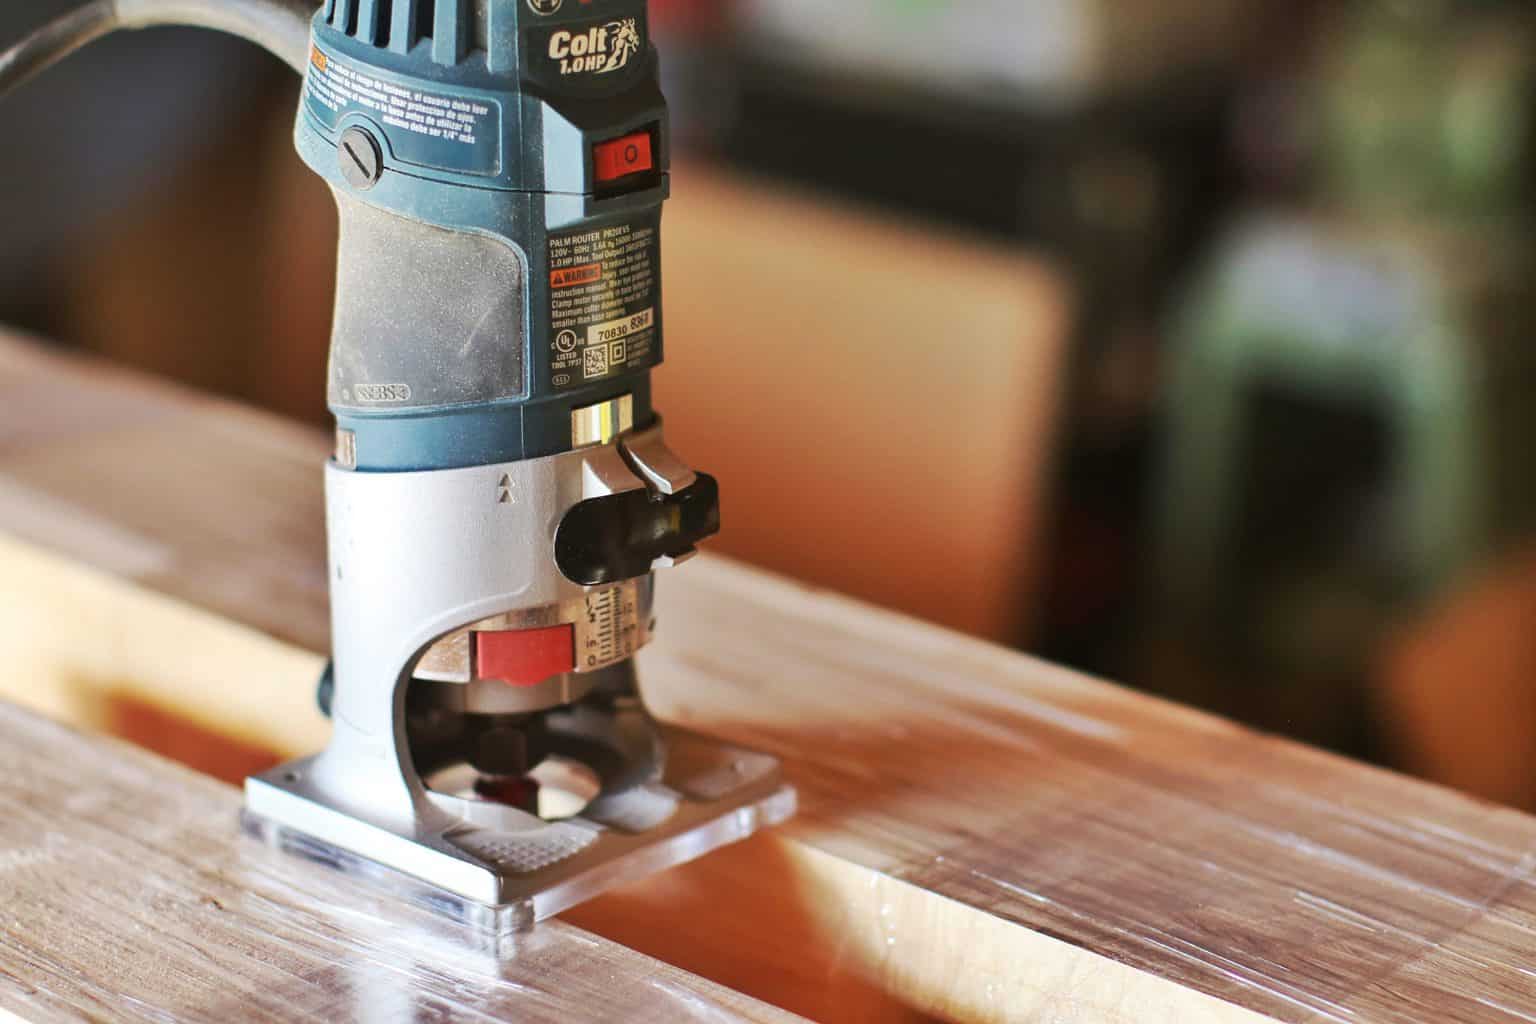 Using a router as a jointer